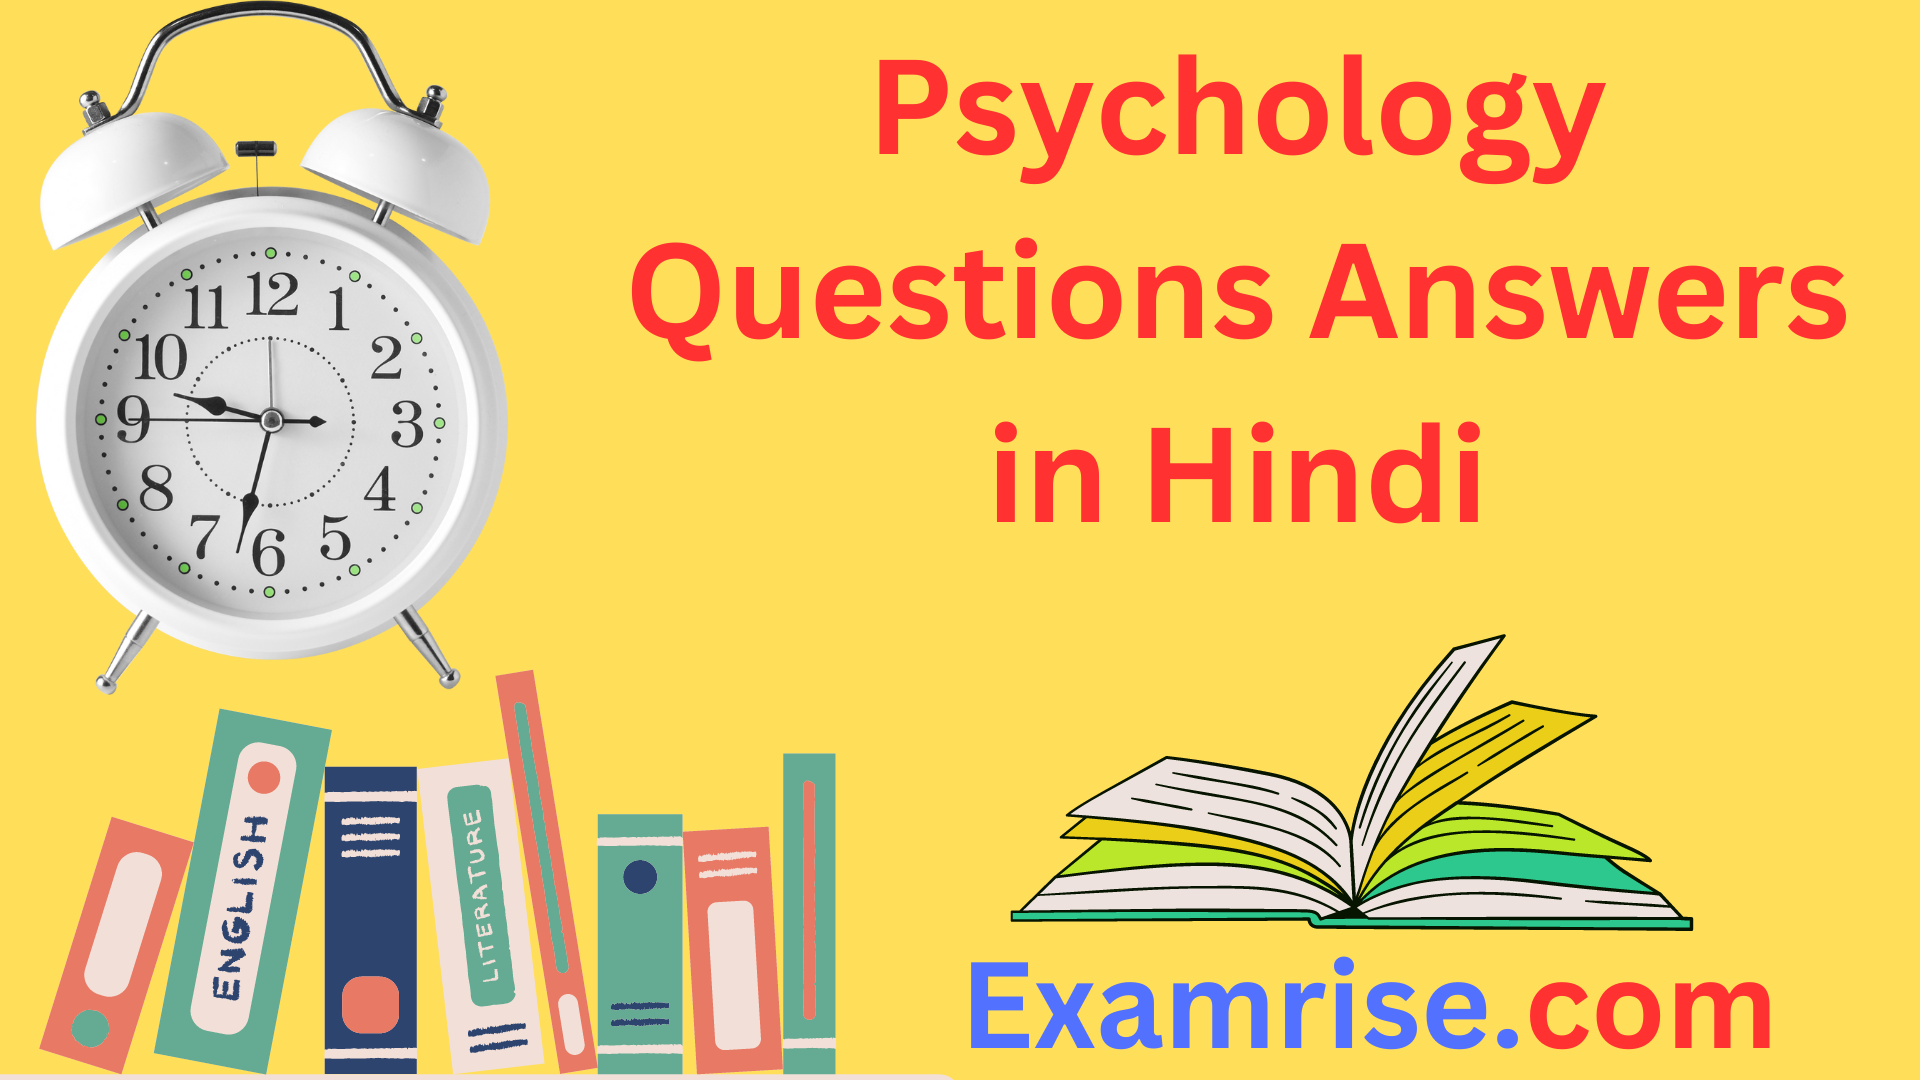 Psychology Questions Answers in Hindi